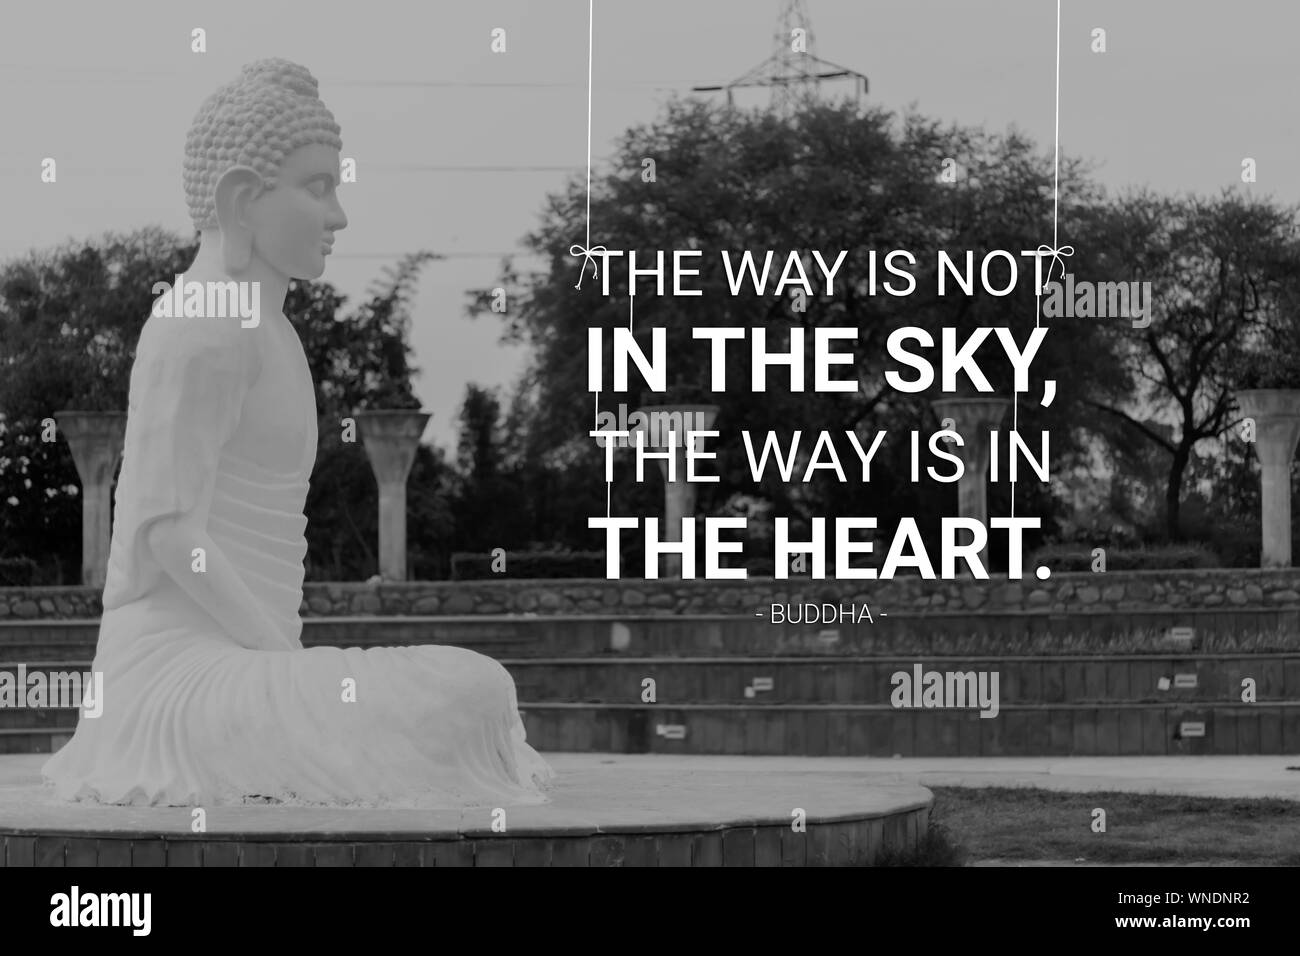 The way is not in the sky the way is in the heart - buddha Stock Photo